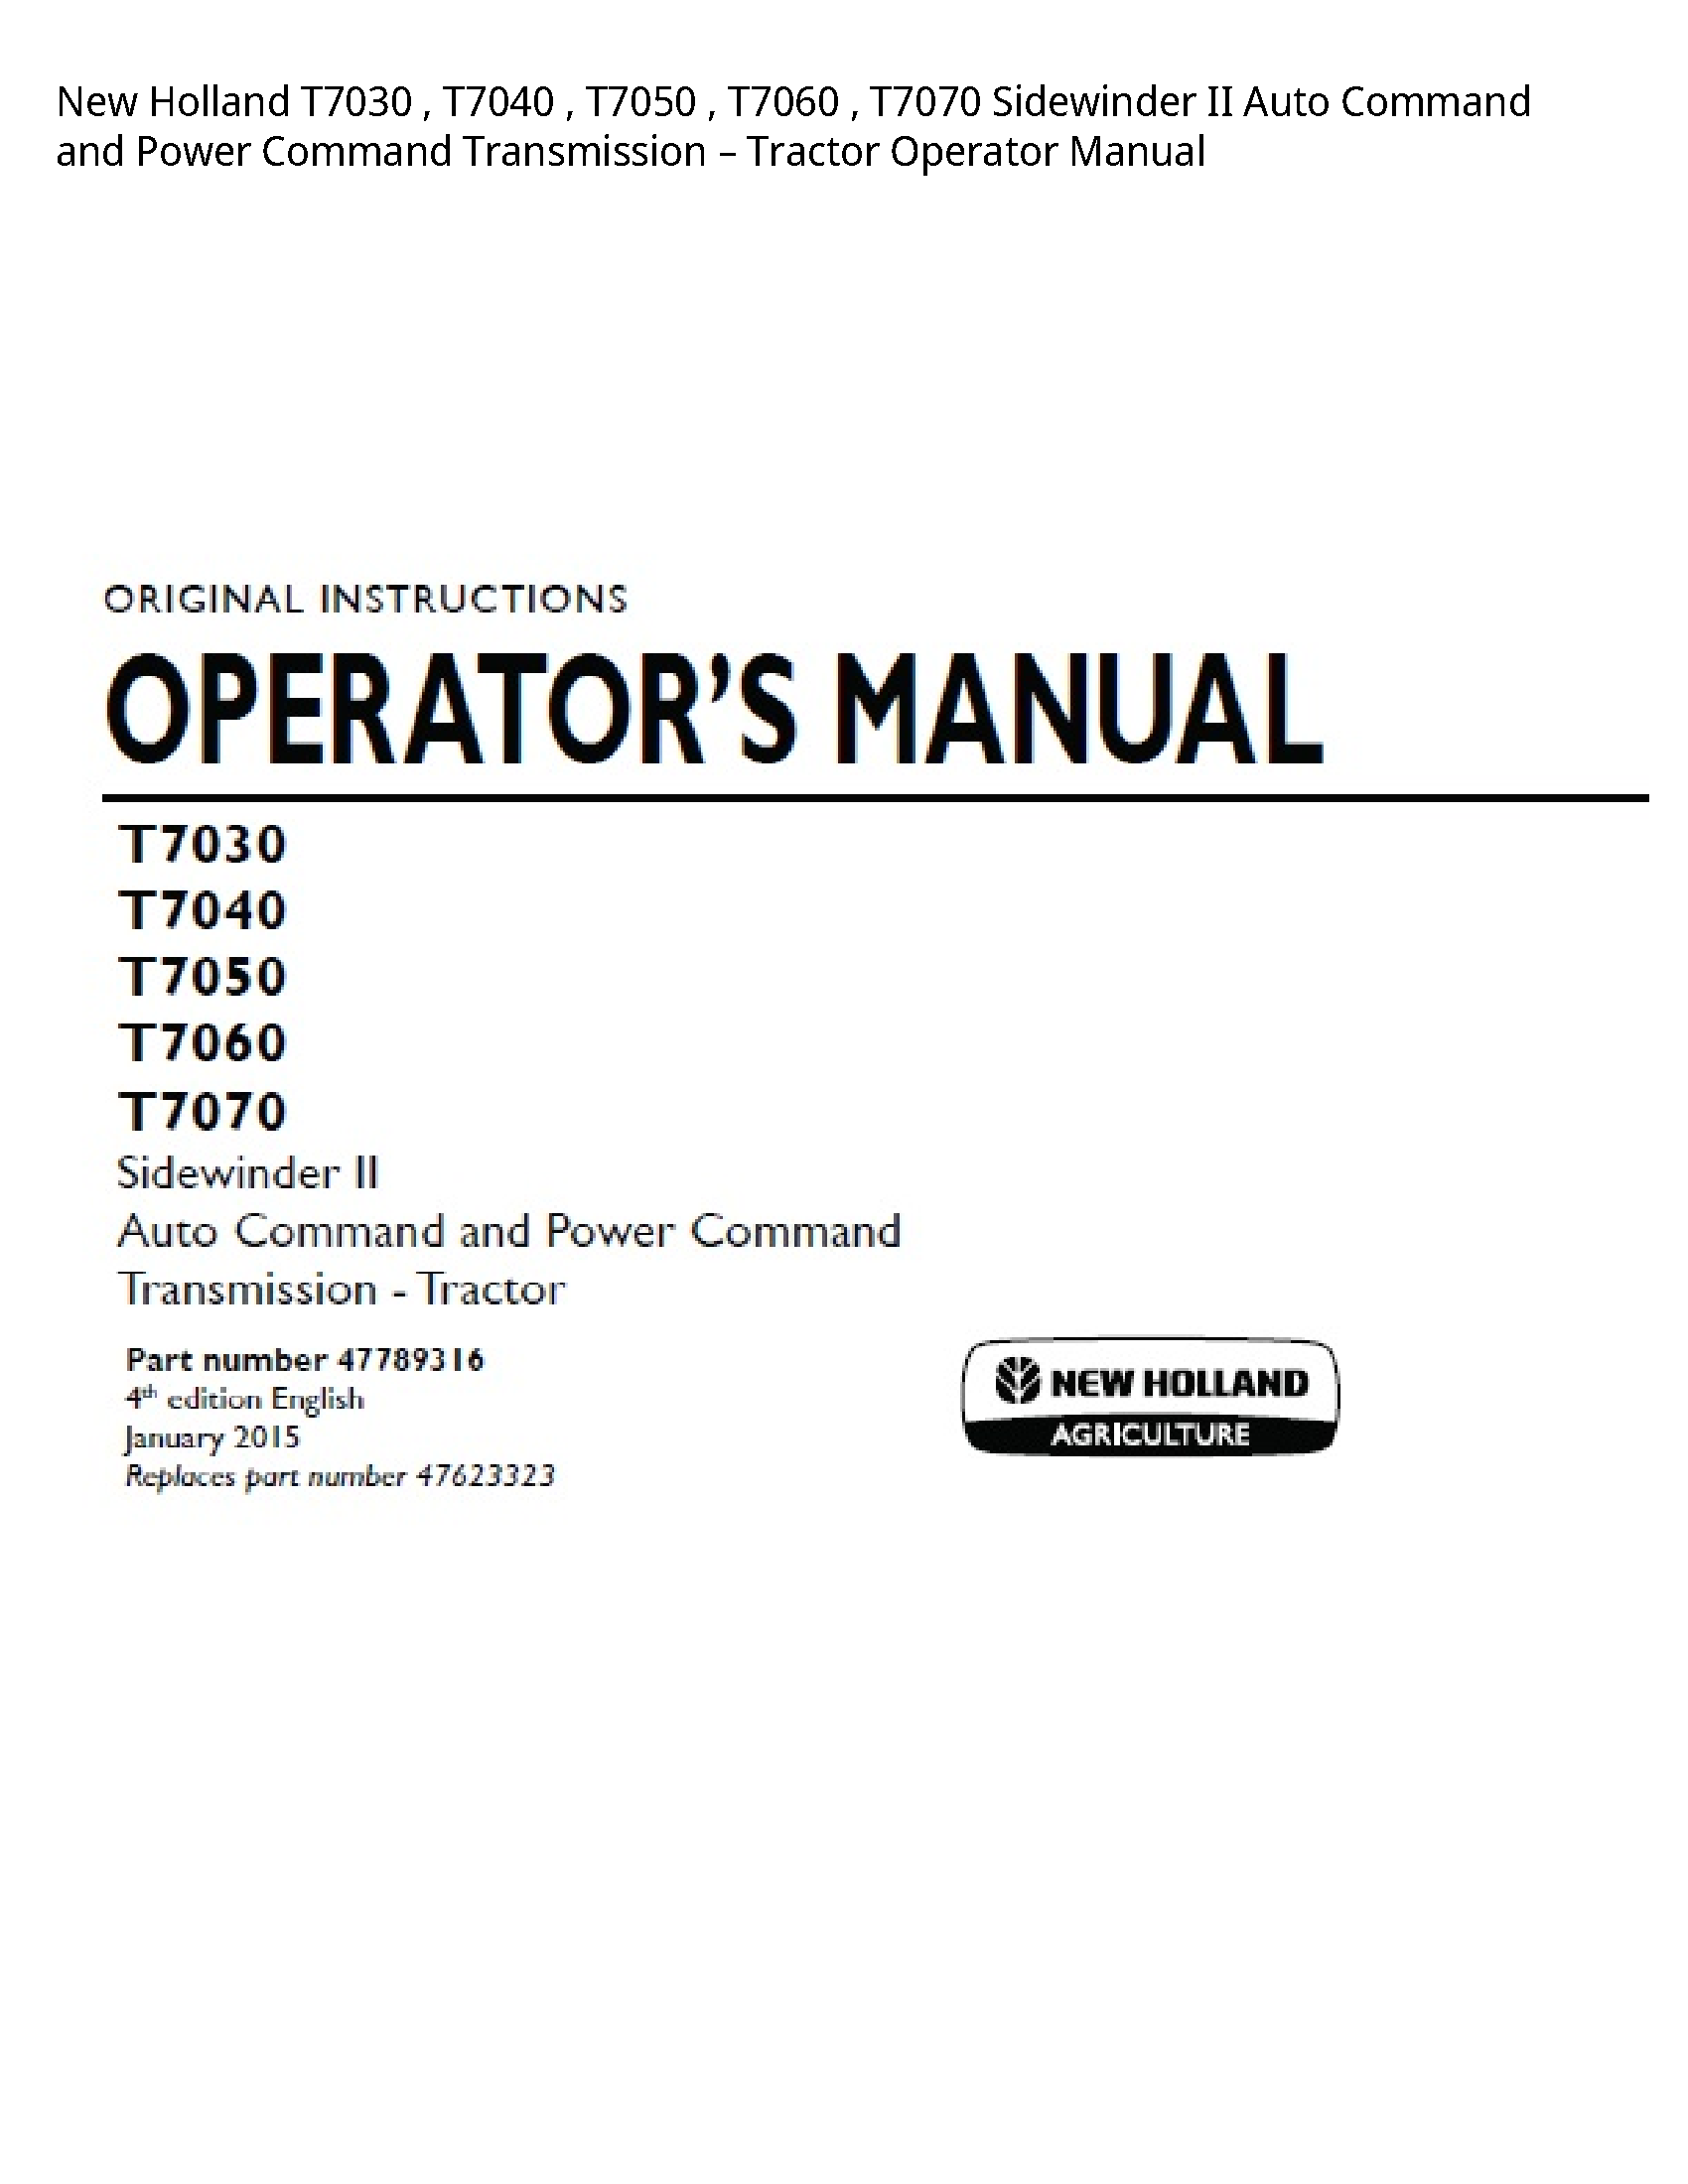 New Holland T7030 Sidewinder II Auto Command  Power Command Transmission Tractor Operator manual